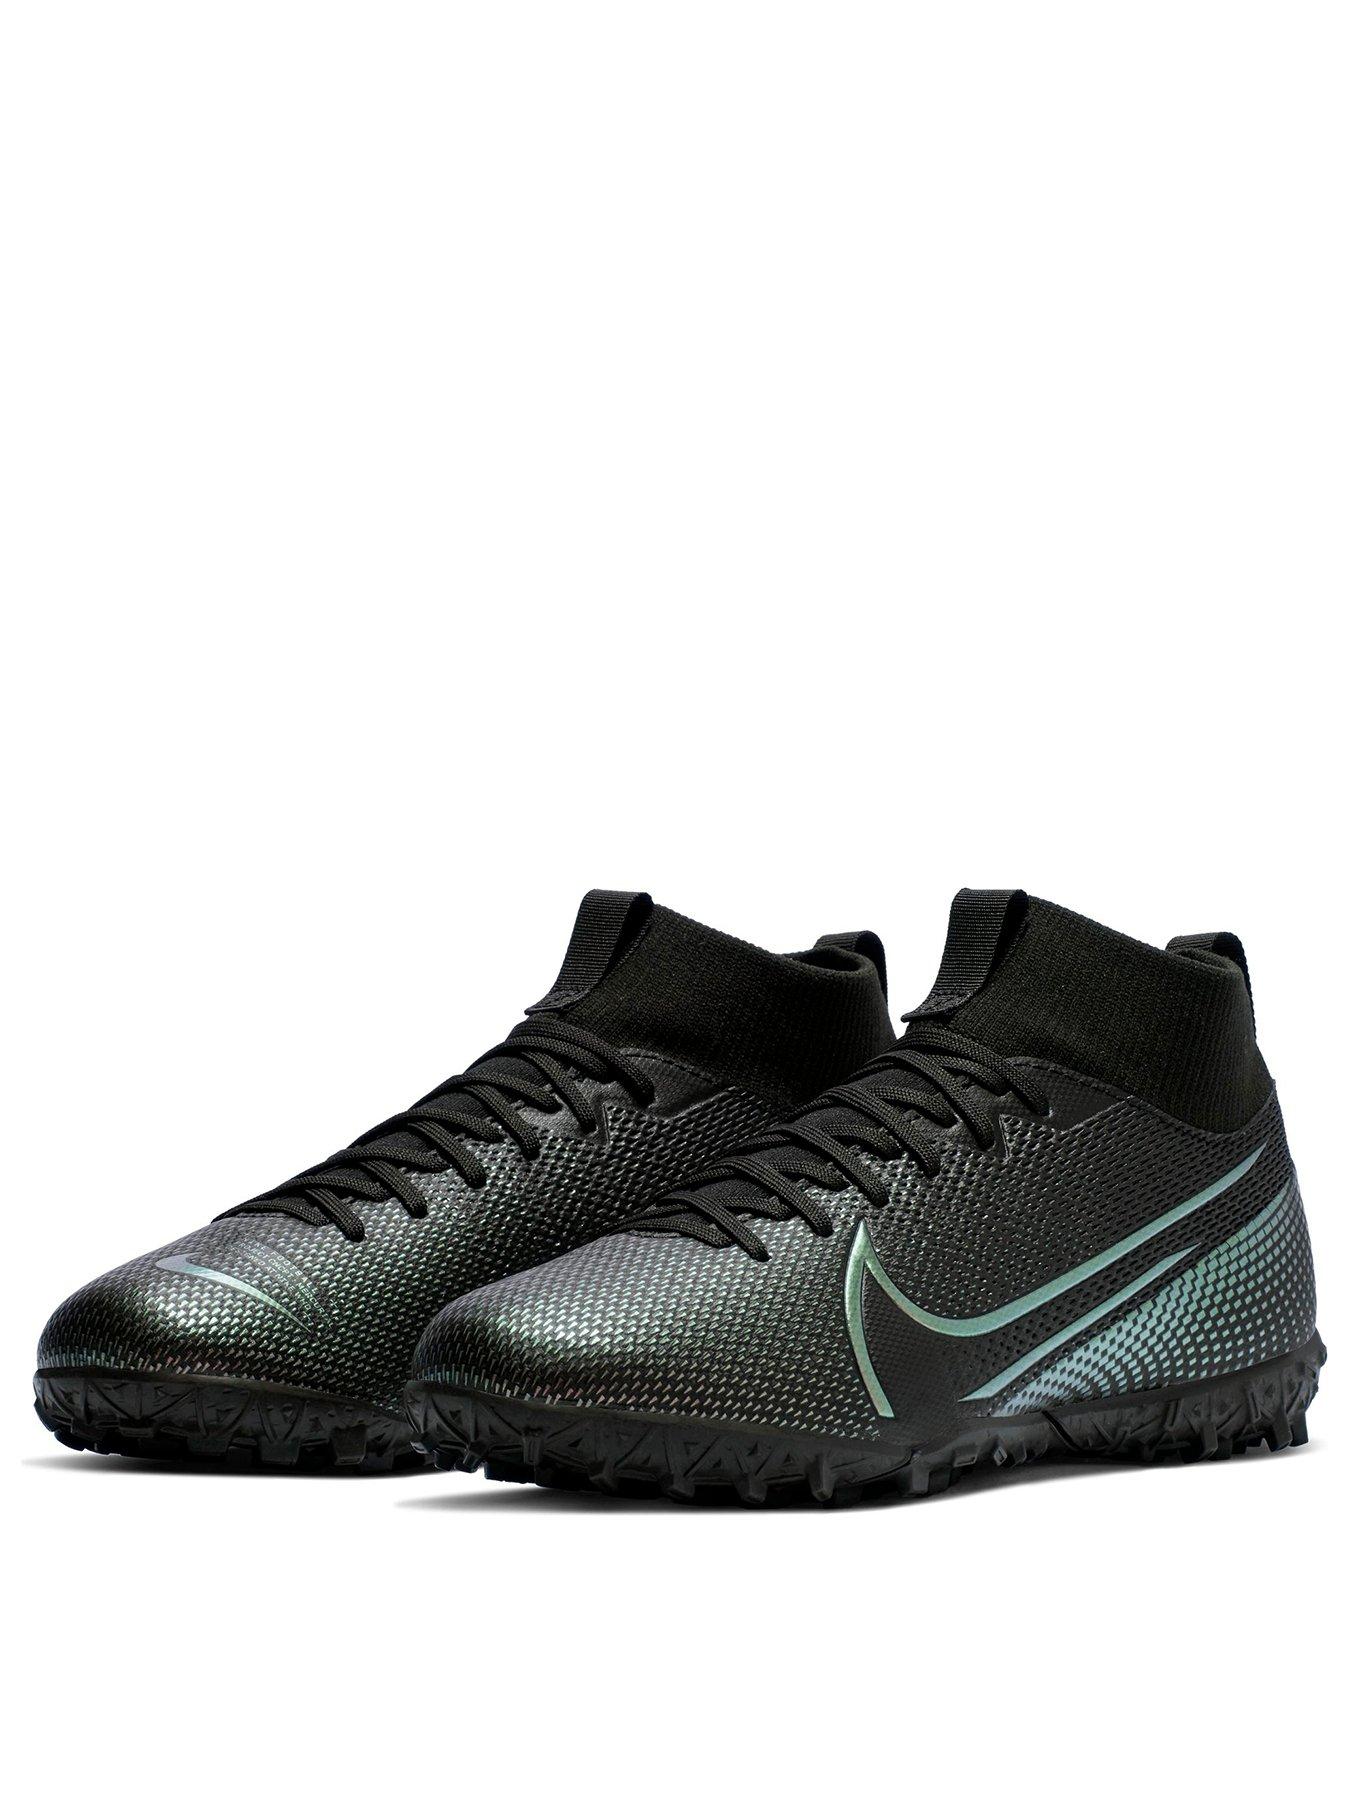 Compare Prices On Kids Nike Mercurial Superfly VI Black Lux.